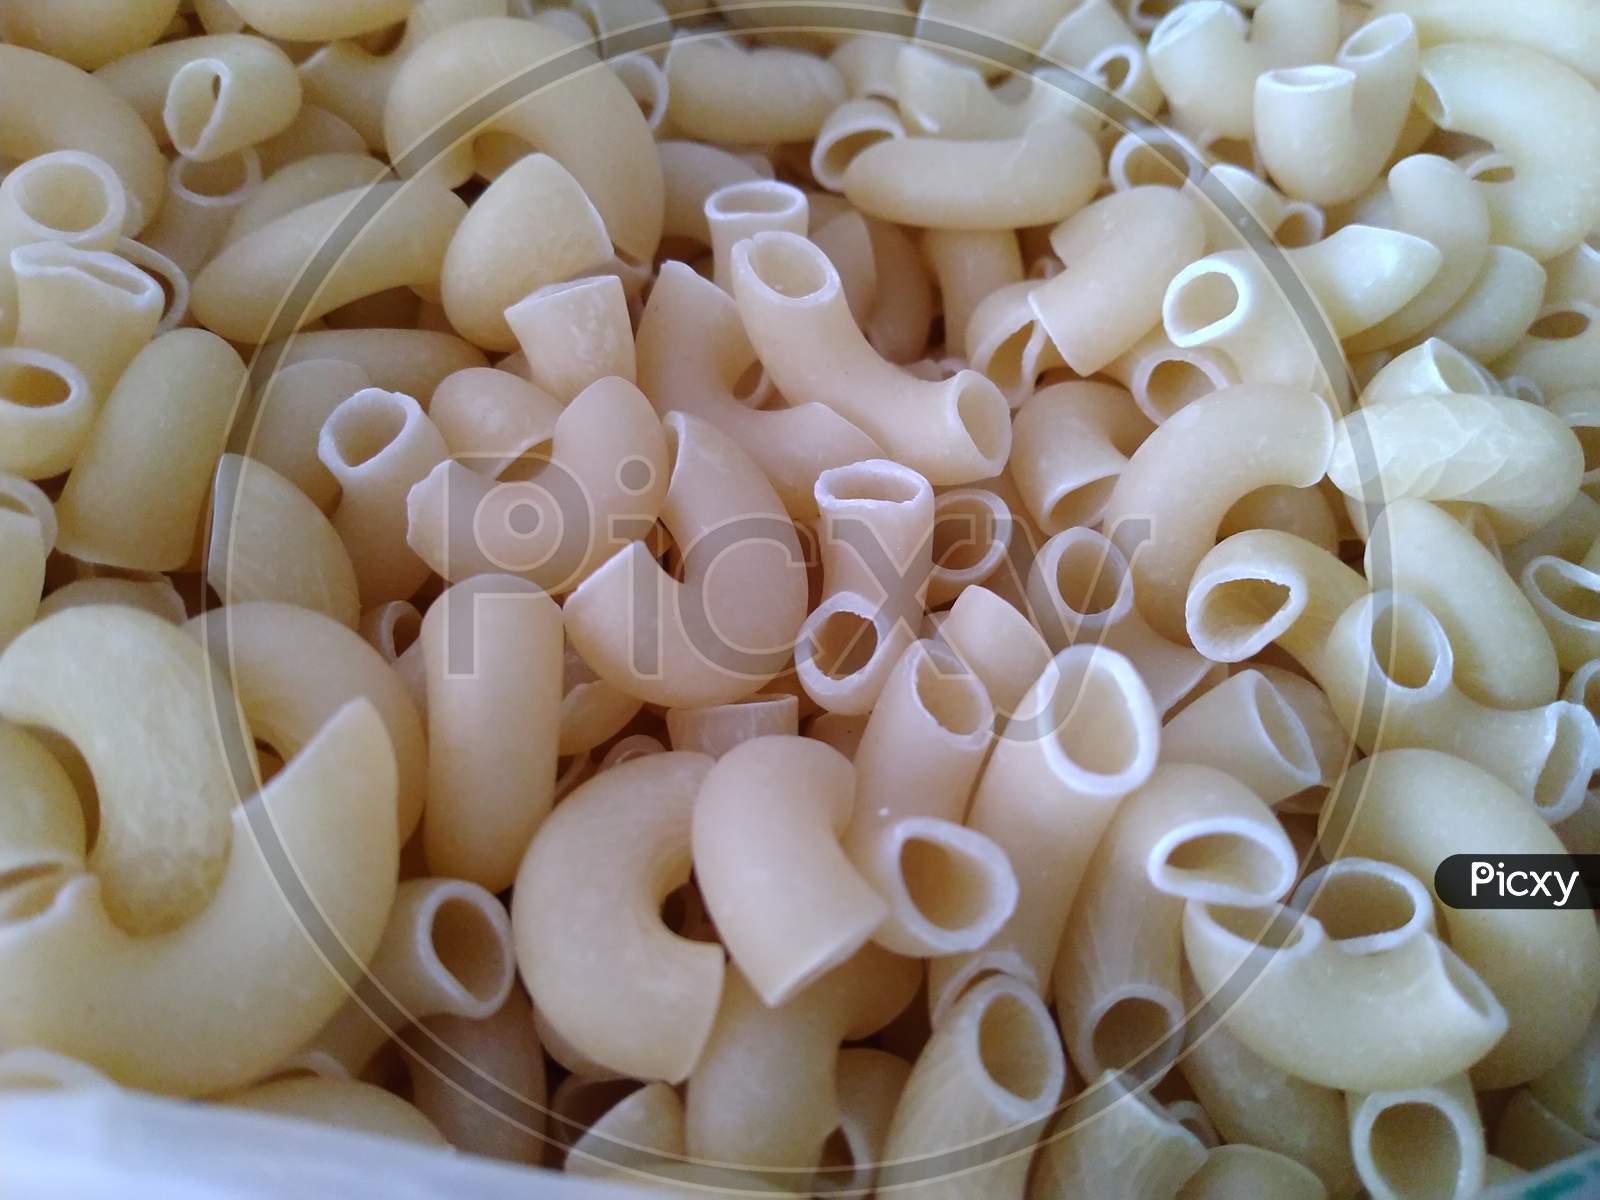 raw pasta displayed for sale at a kirana store